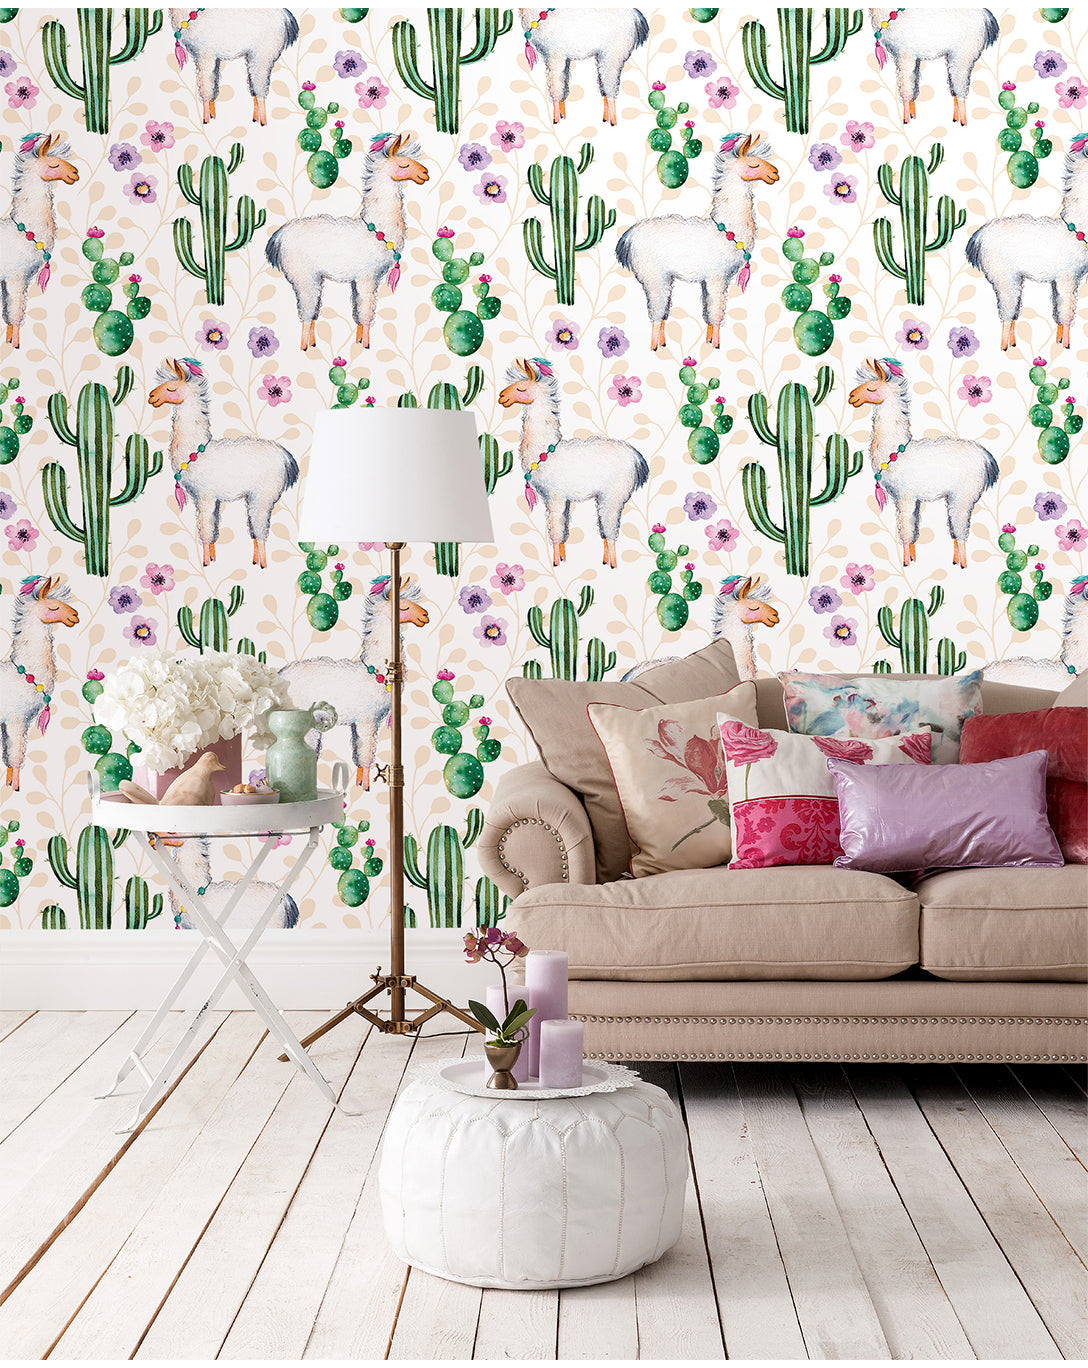 Temporary self adhesive removable wallpaper watercolor cactus flowers and lamas floral whimsical hand painted nature illustration CC046